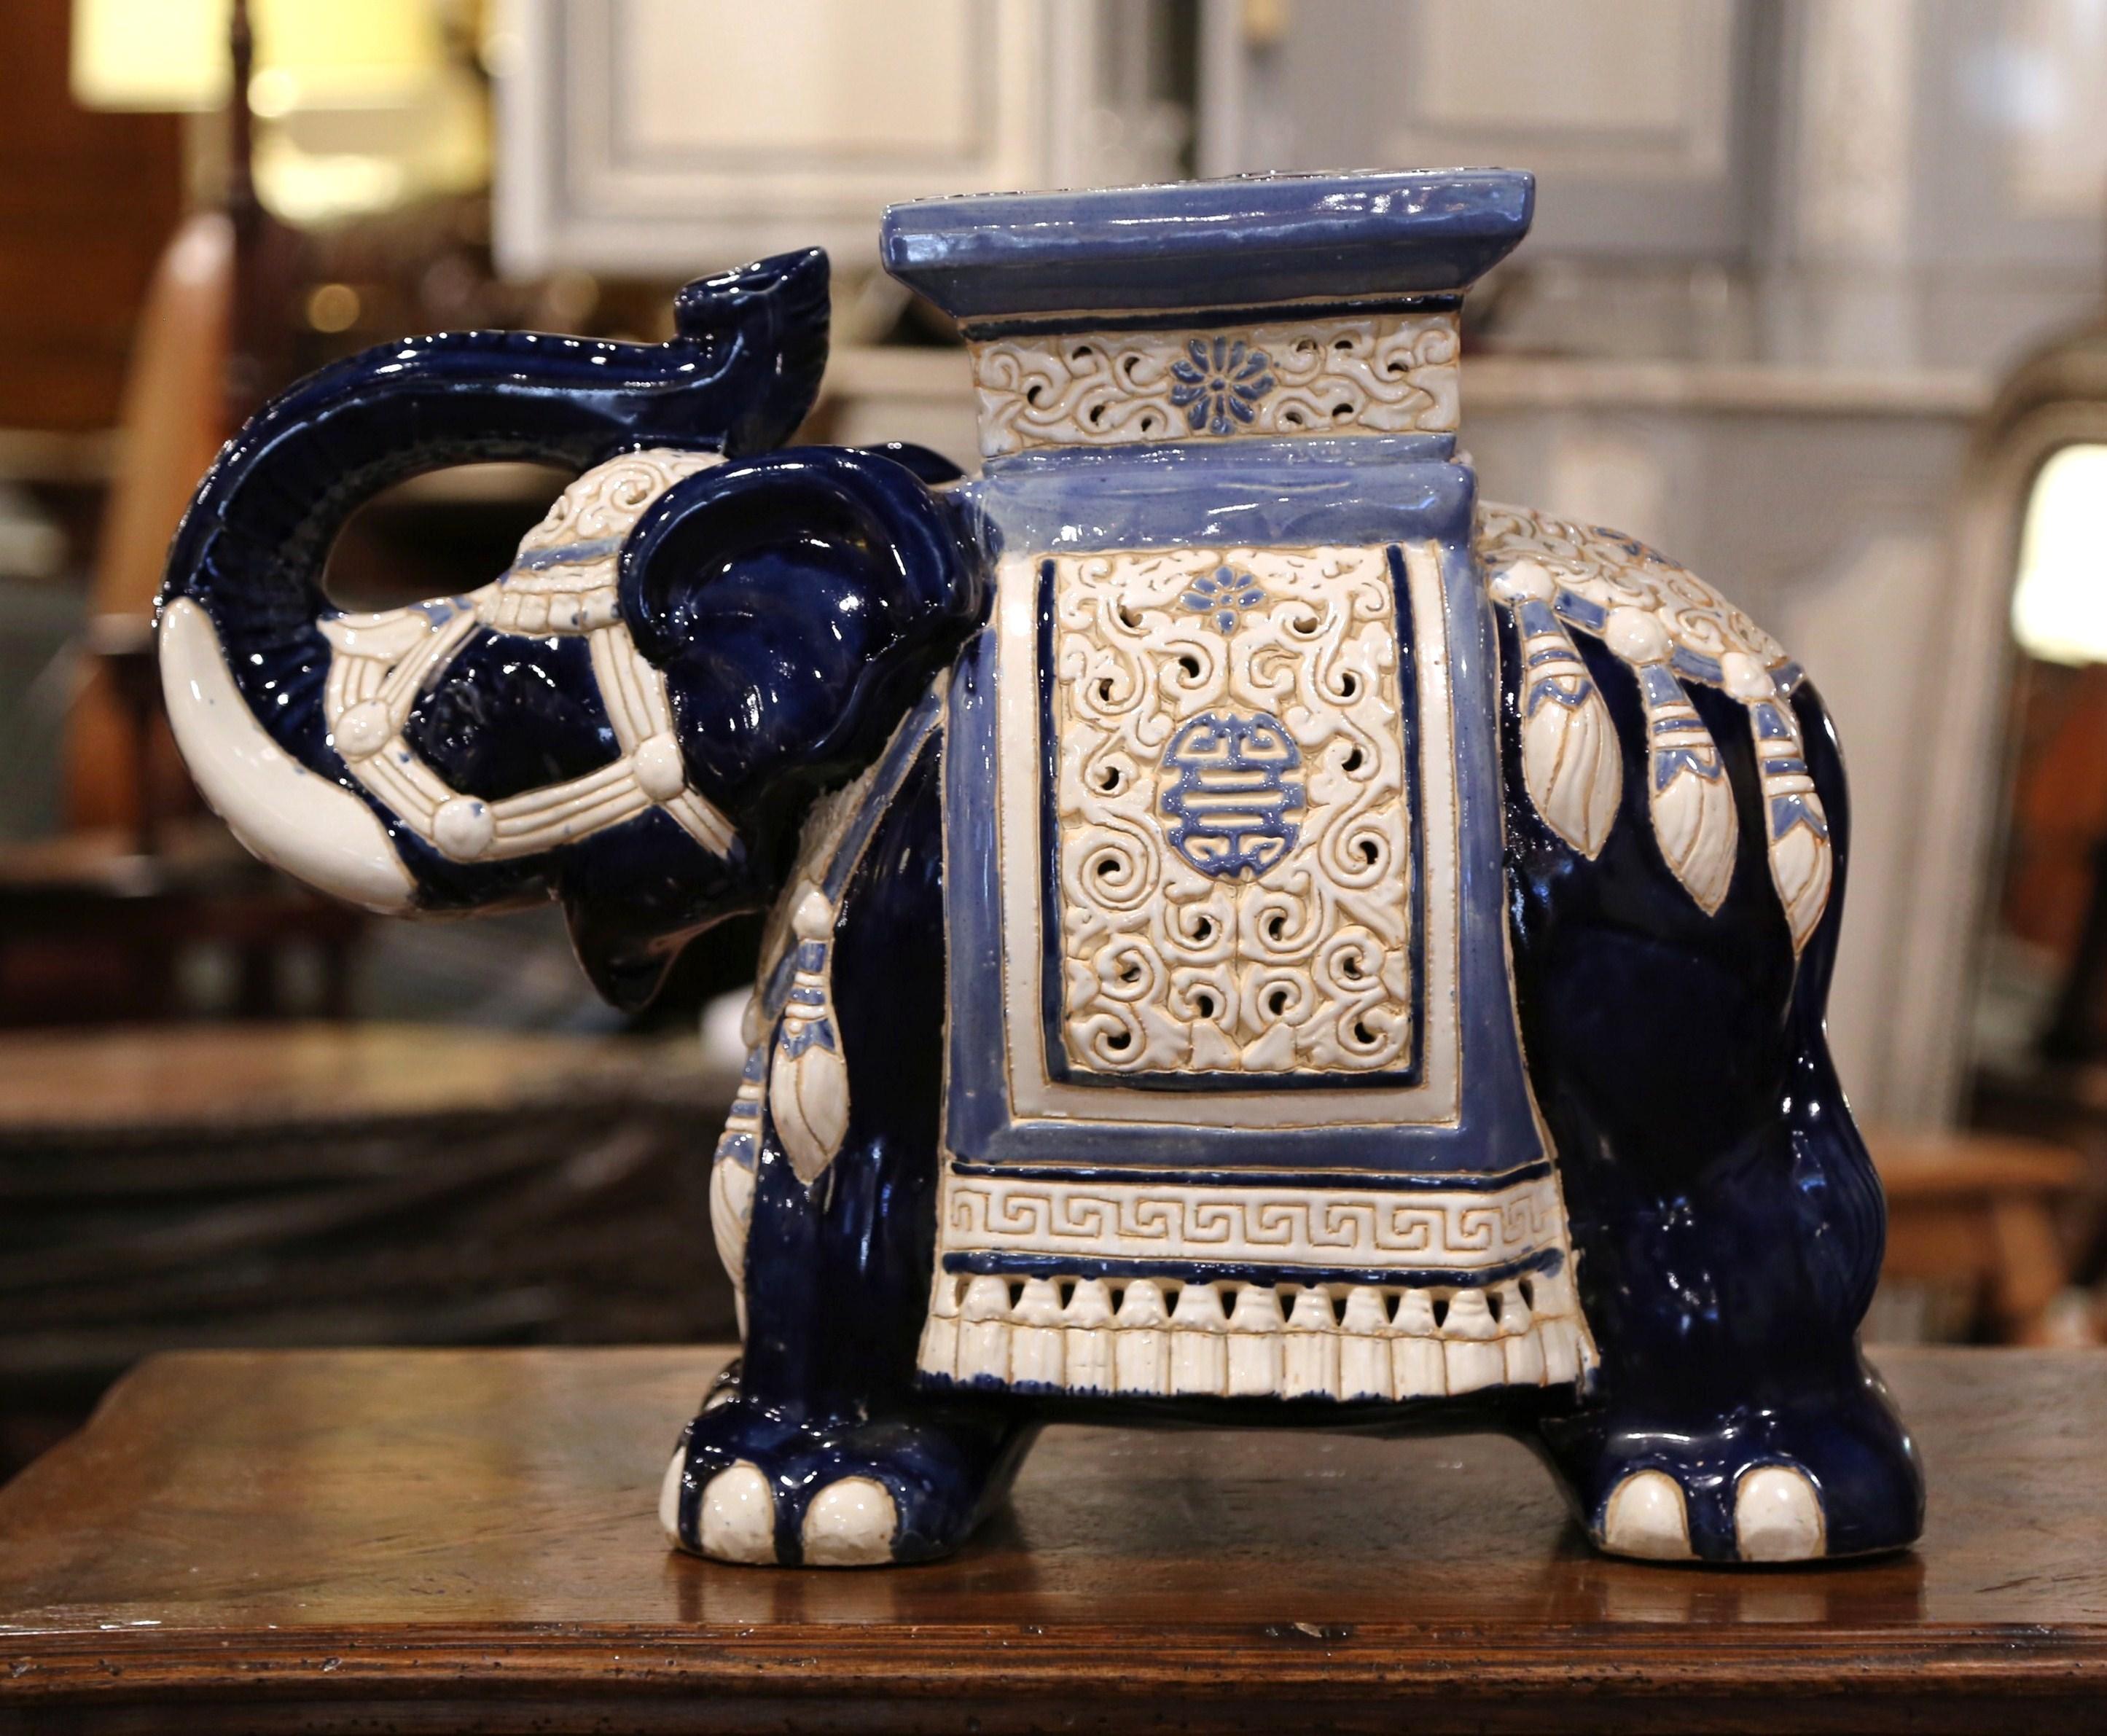 This interesting, vintage porcelain garden seat was found in France. Crafted circa 1960, the ceramic seating shaped as an elephant with his trunk raised (good luck sign in Asia), is heavily decorated in oriental finery; the colorful mammal has a